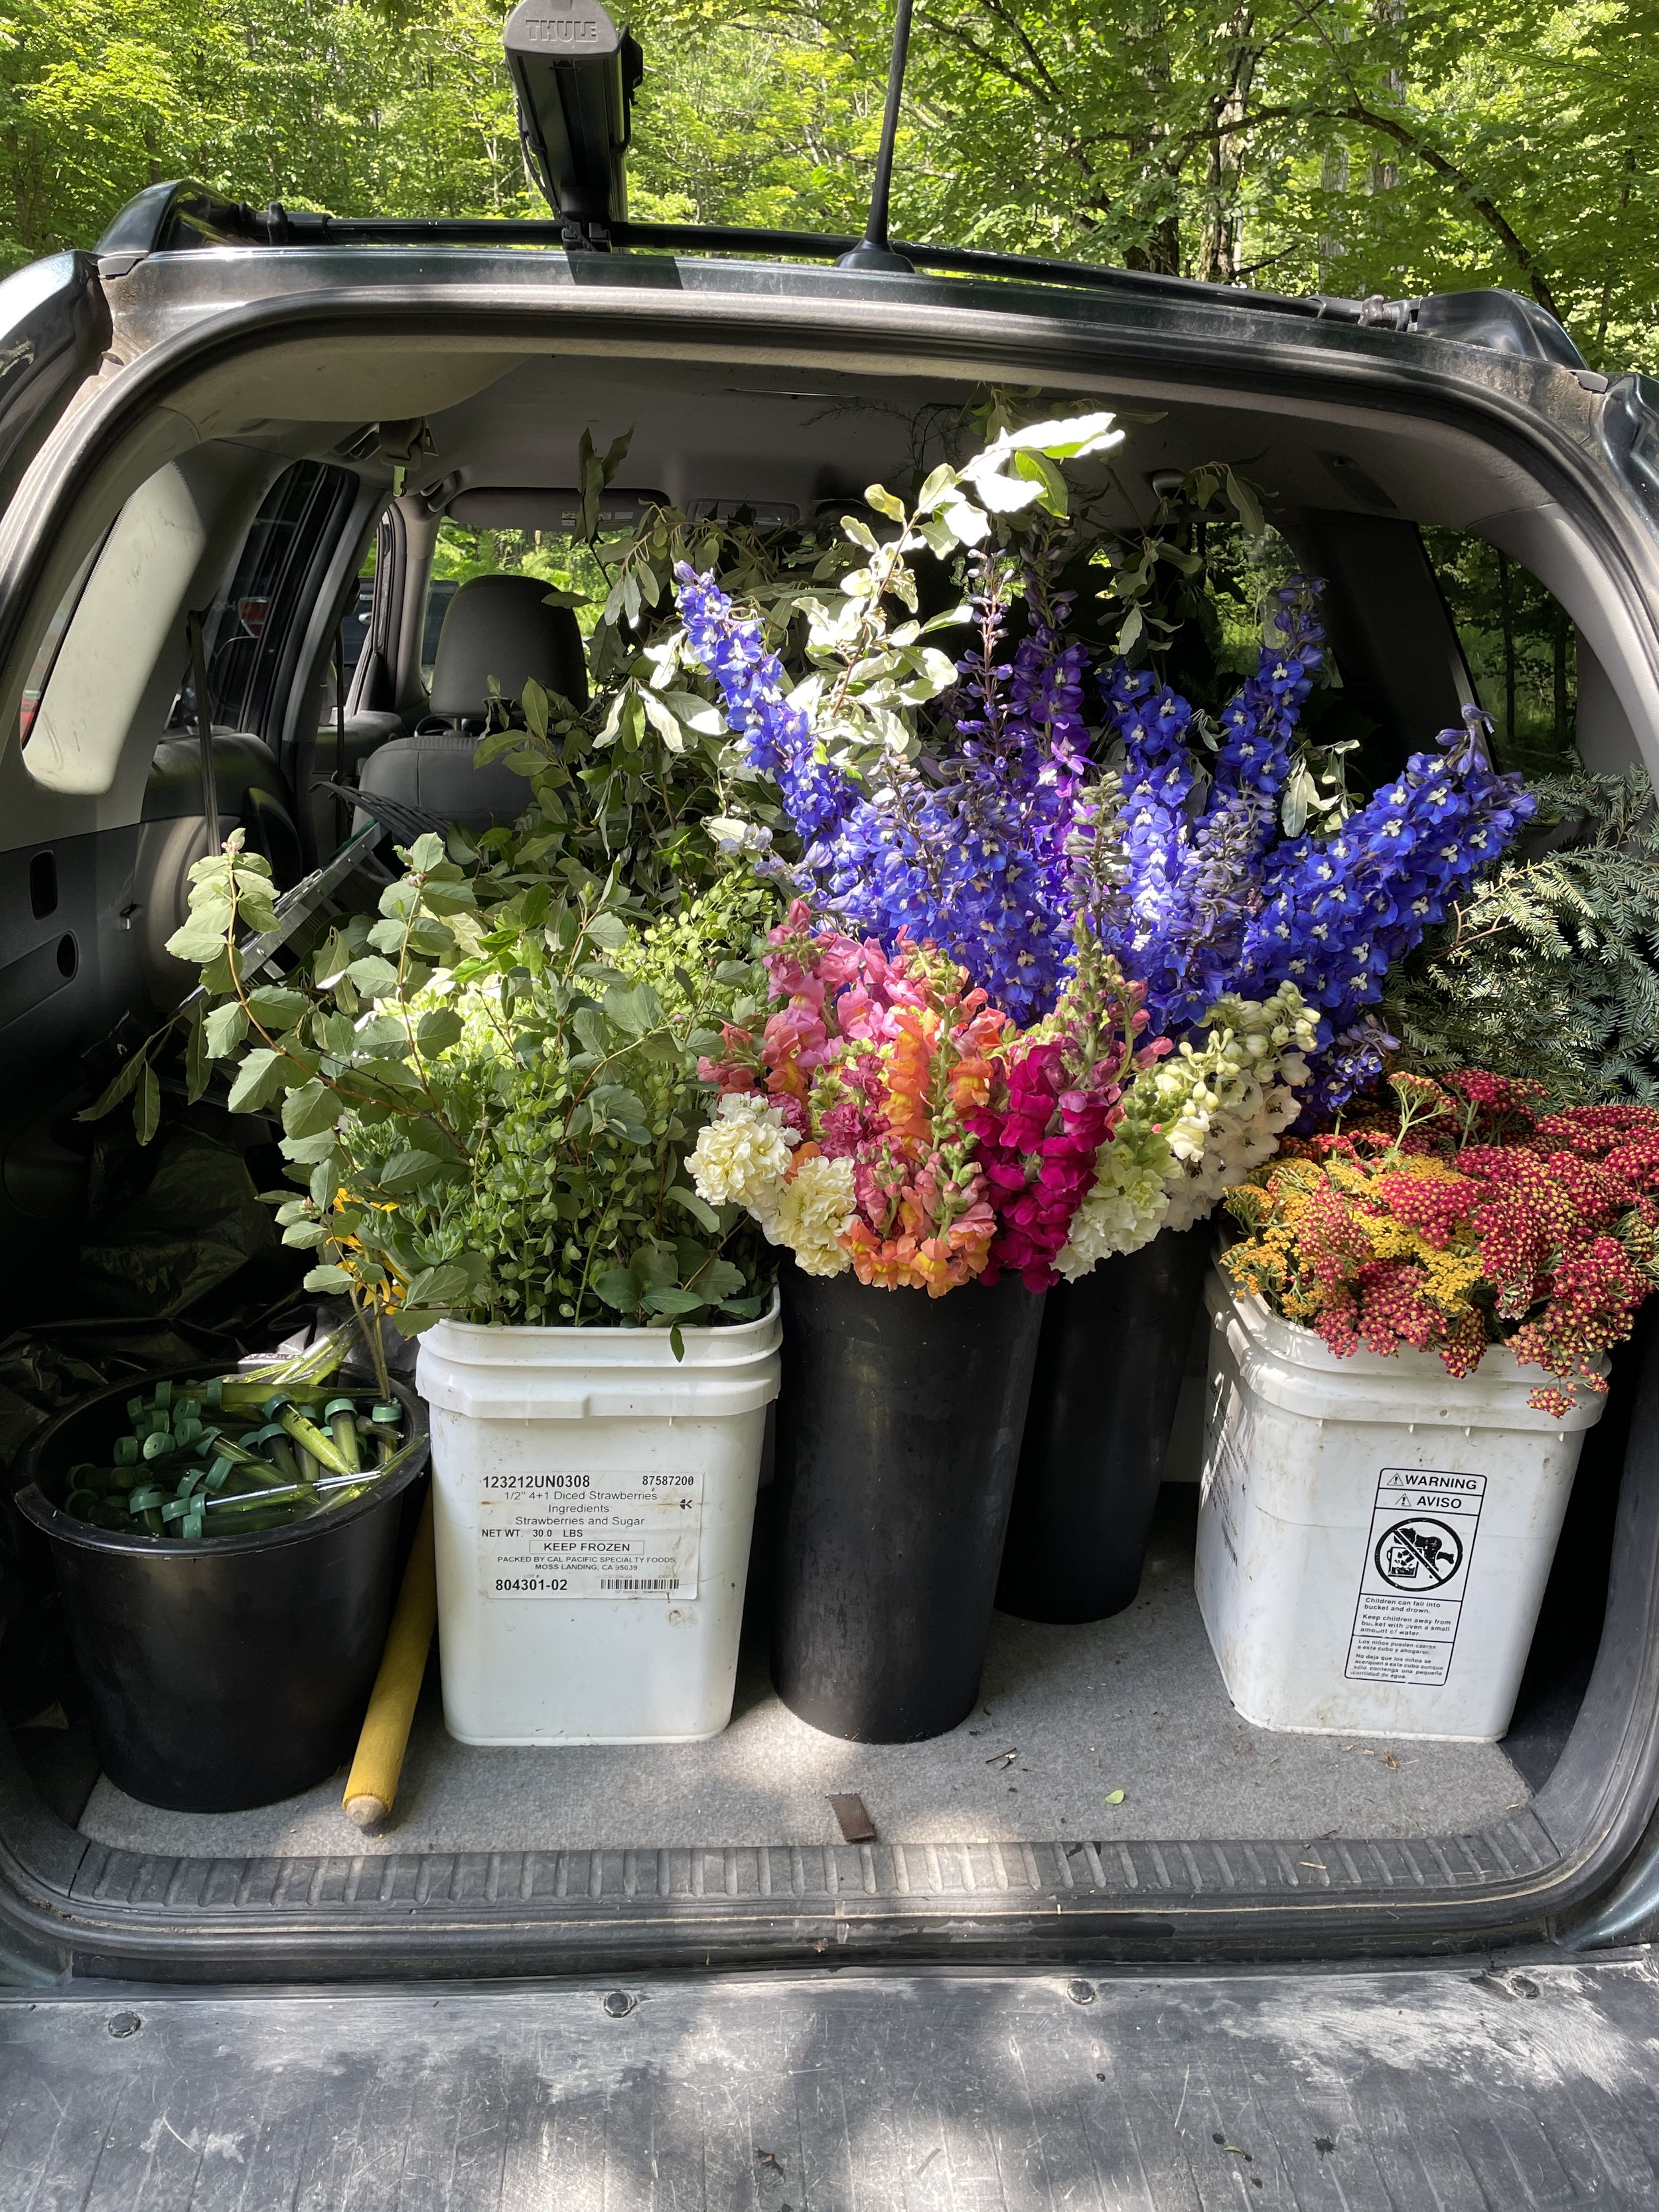 Carload of flowers!